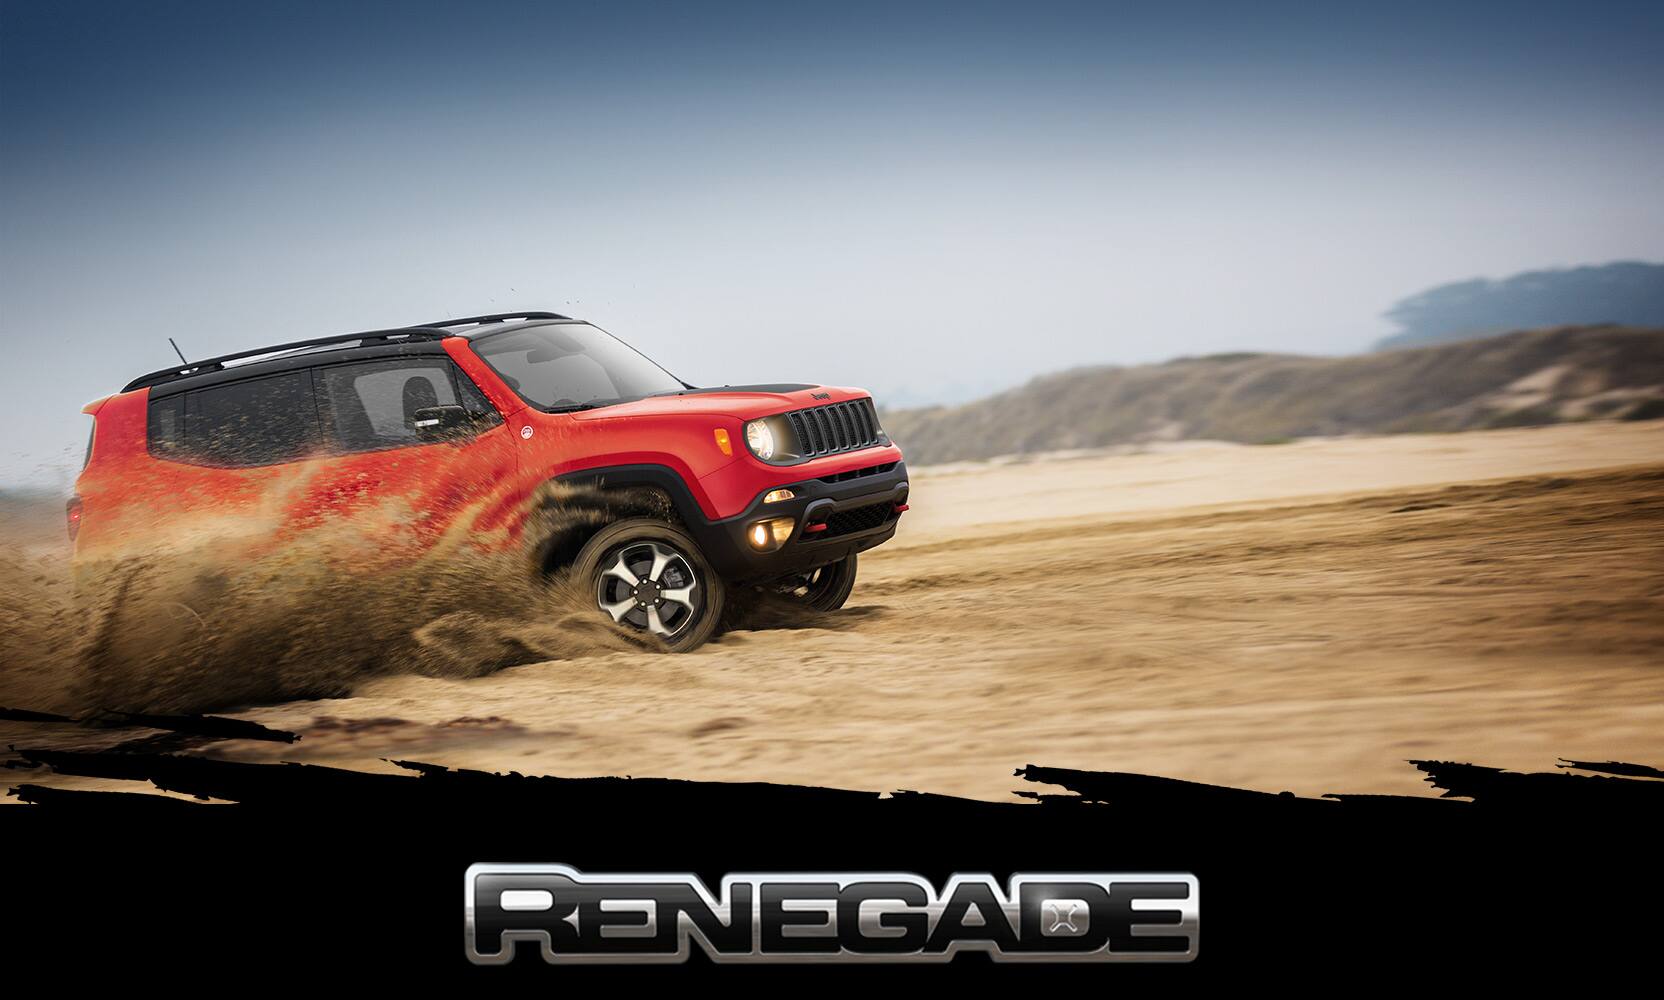 The 2023 Jeep Renegade Trailhawk being driven off-road in the desert with a spray of sand coming from its wheels.